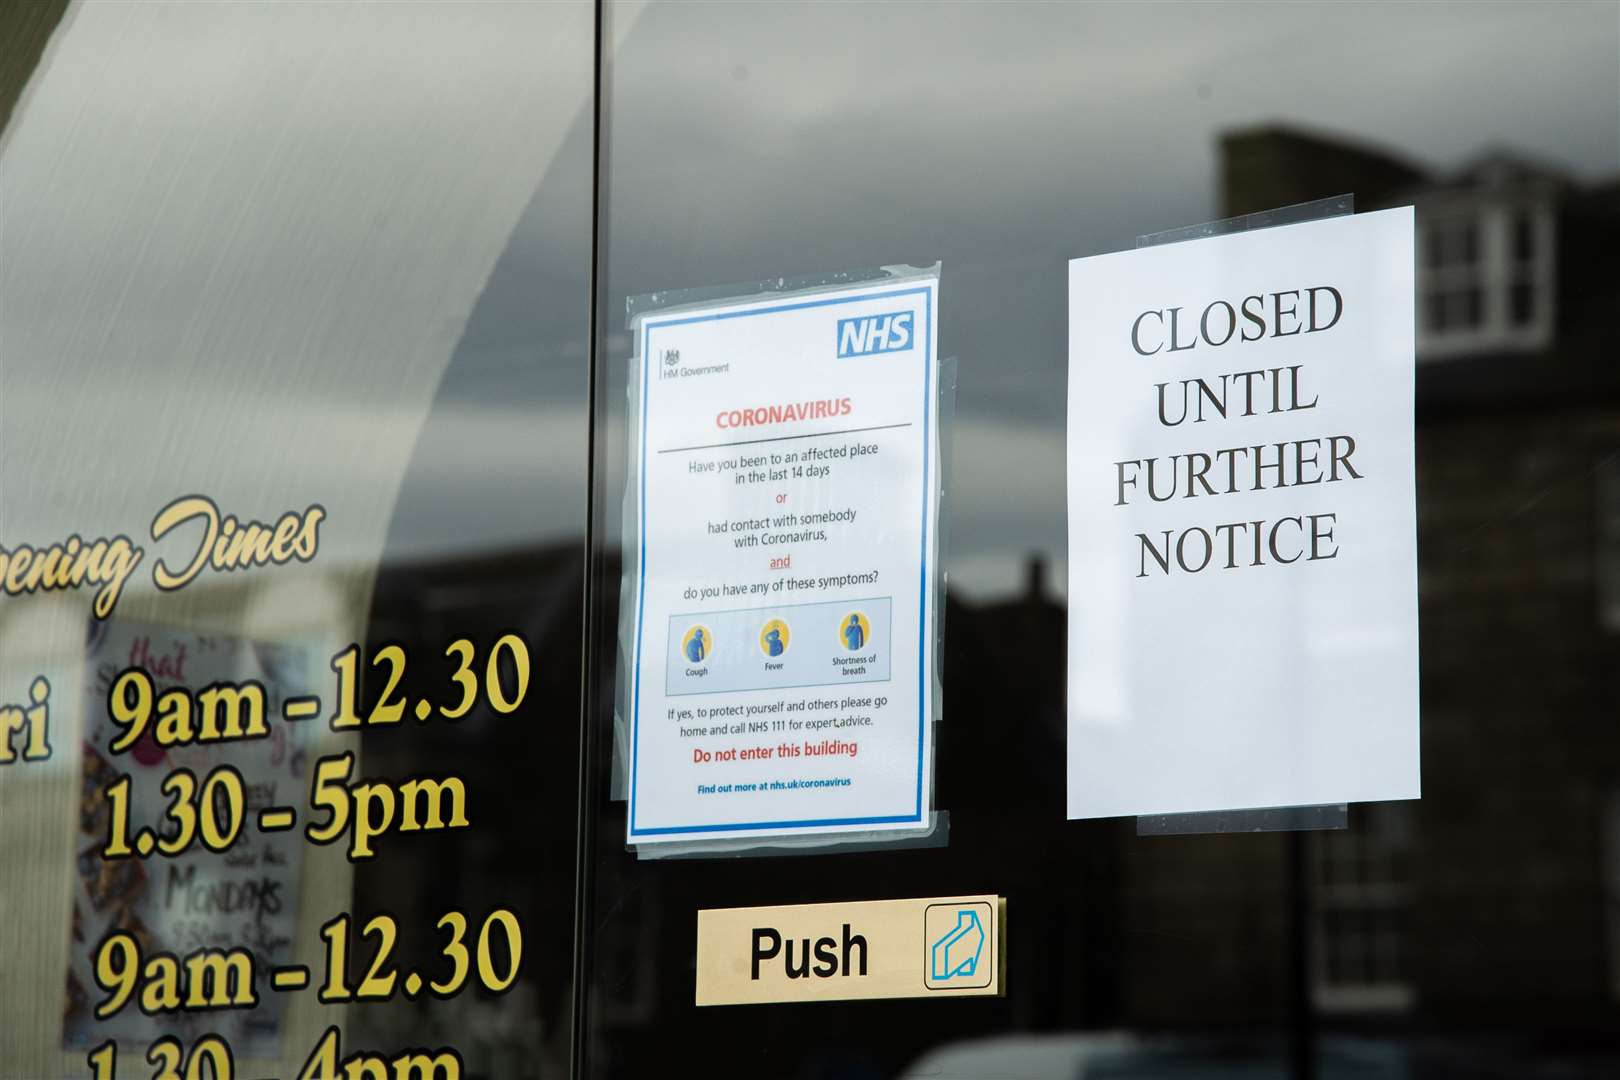 As businesses close to slow the spread of infection, the government's Coronavirus Job Retentiion Scheme provides help to avoid permanently laying off staff.